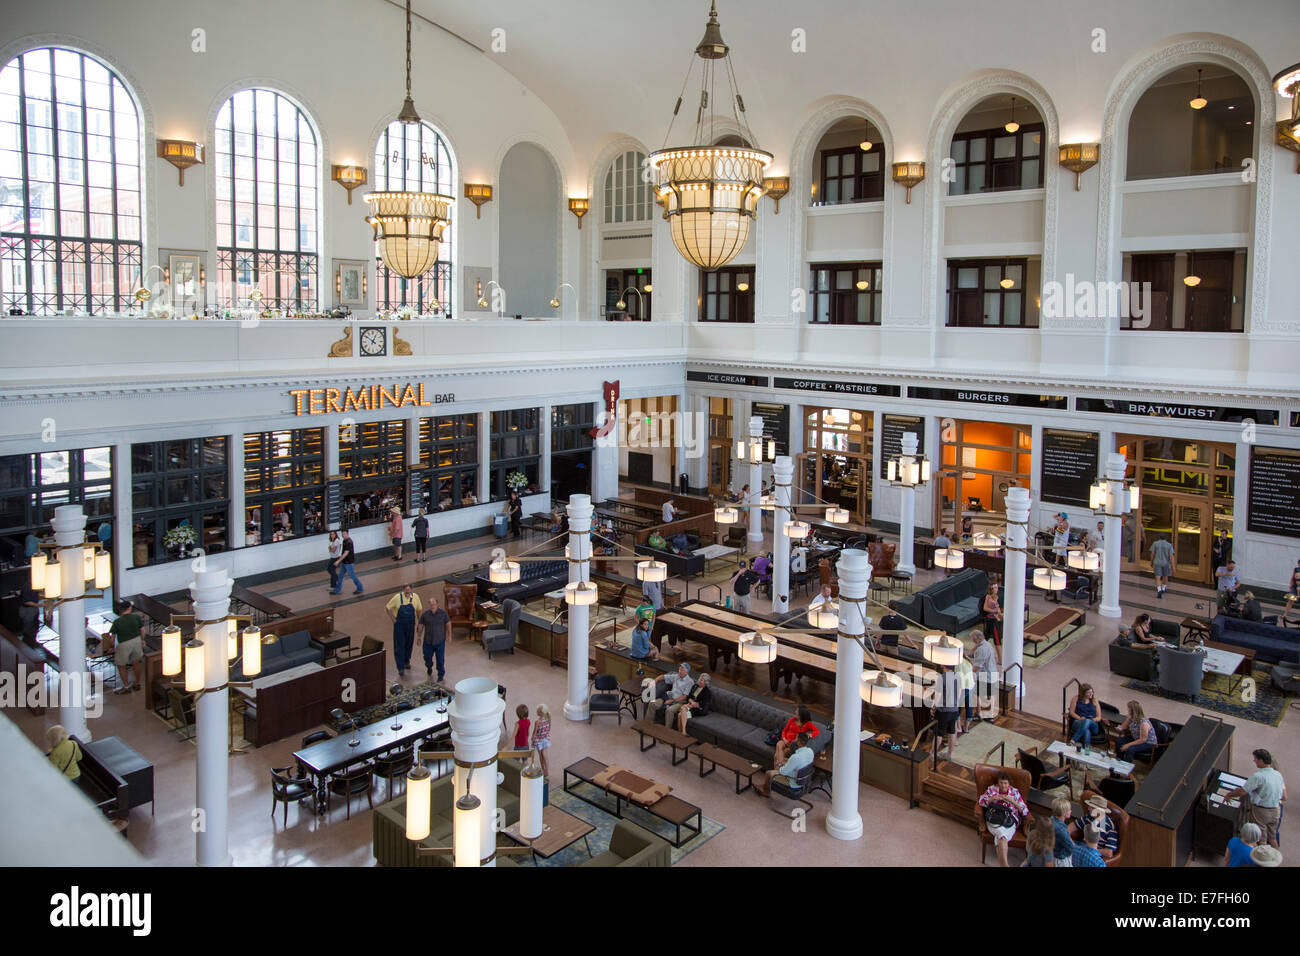 Denver, Colorado - The Great Hall in Denver's historic Union Station. Stock Photo